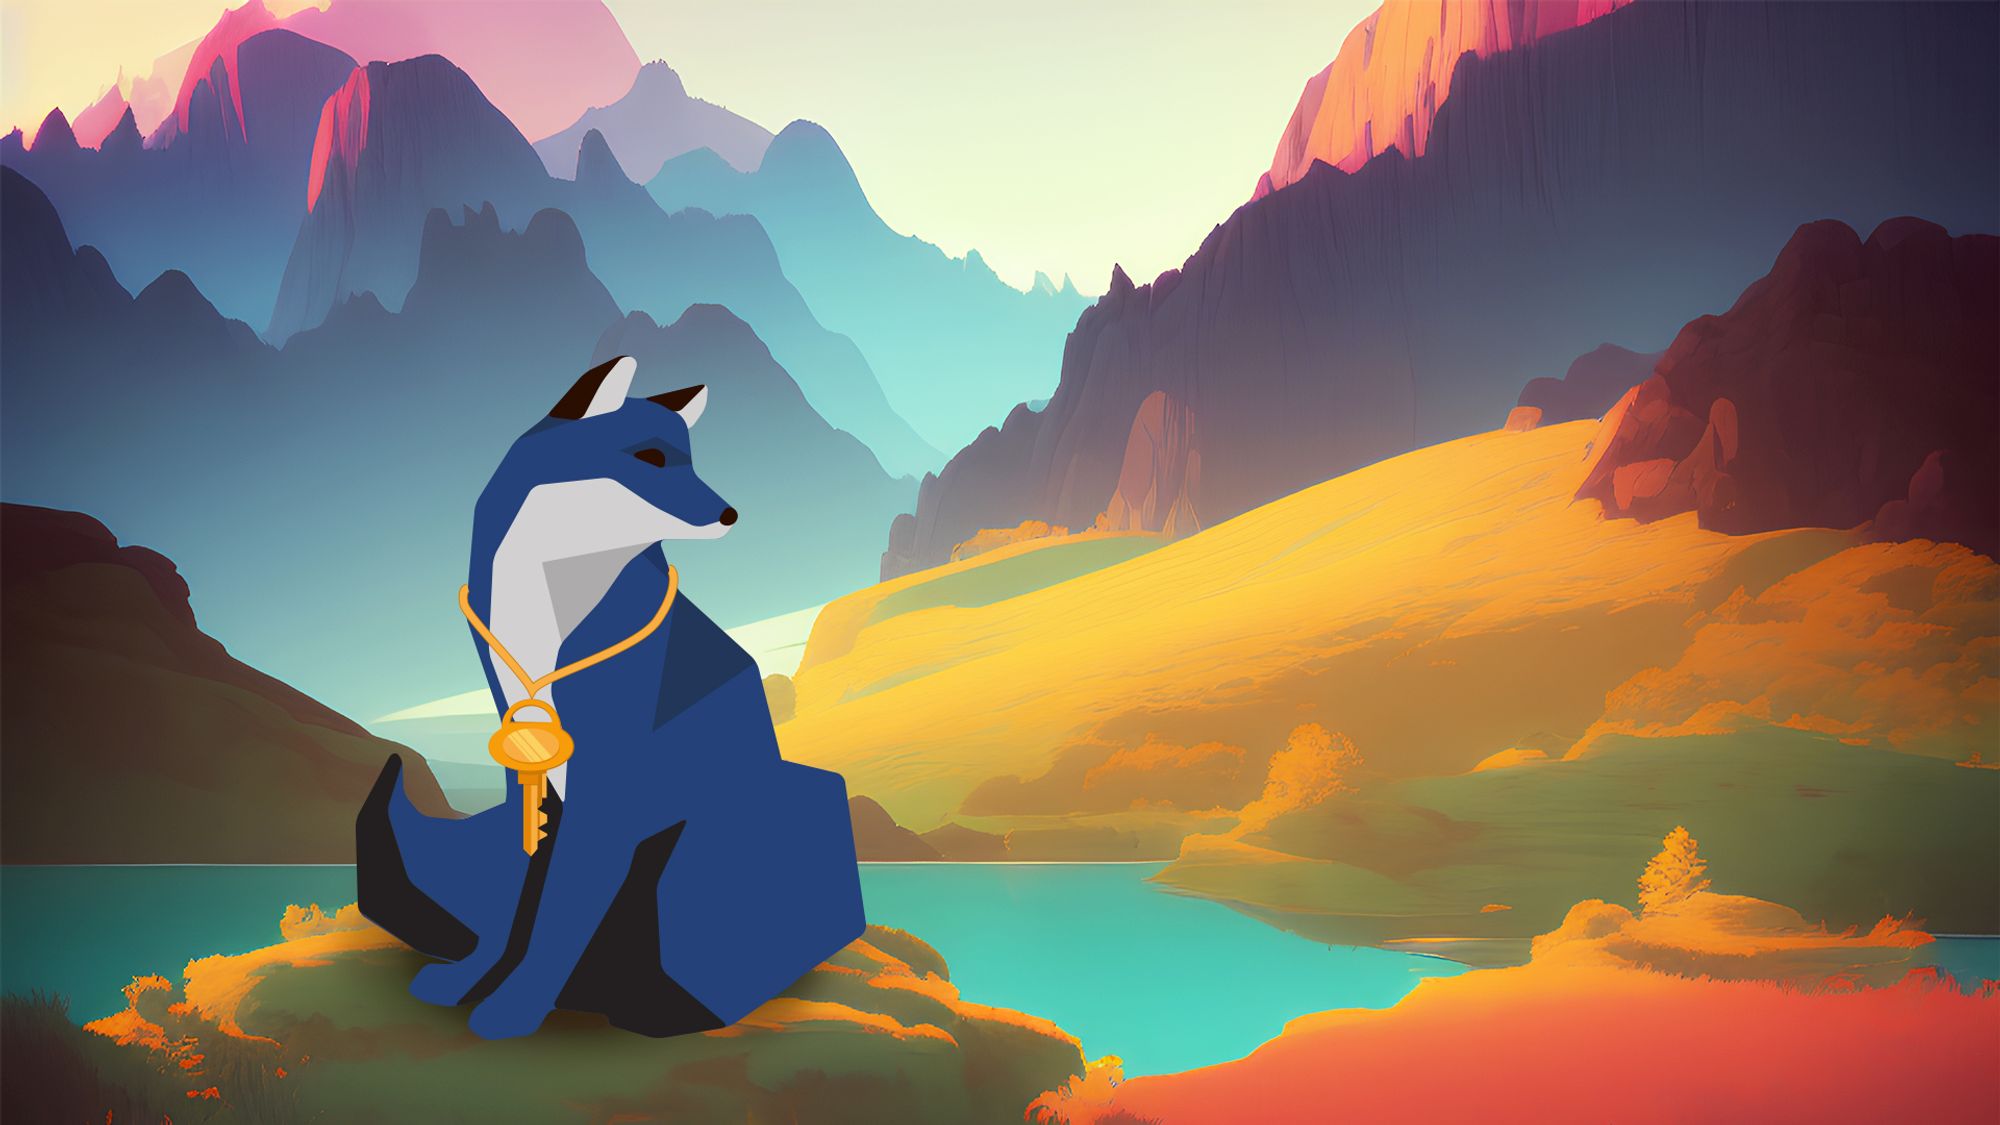 Fox sitting on a mountain with a gold key chain representing self-custody